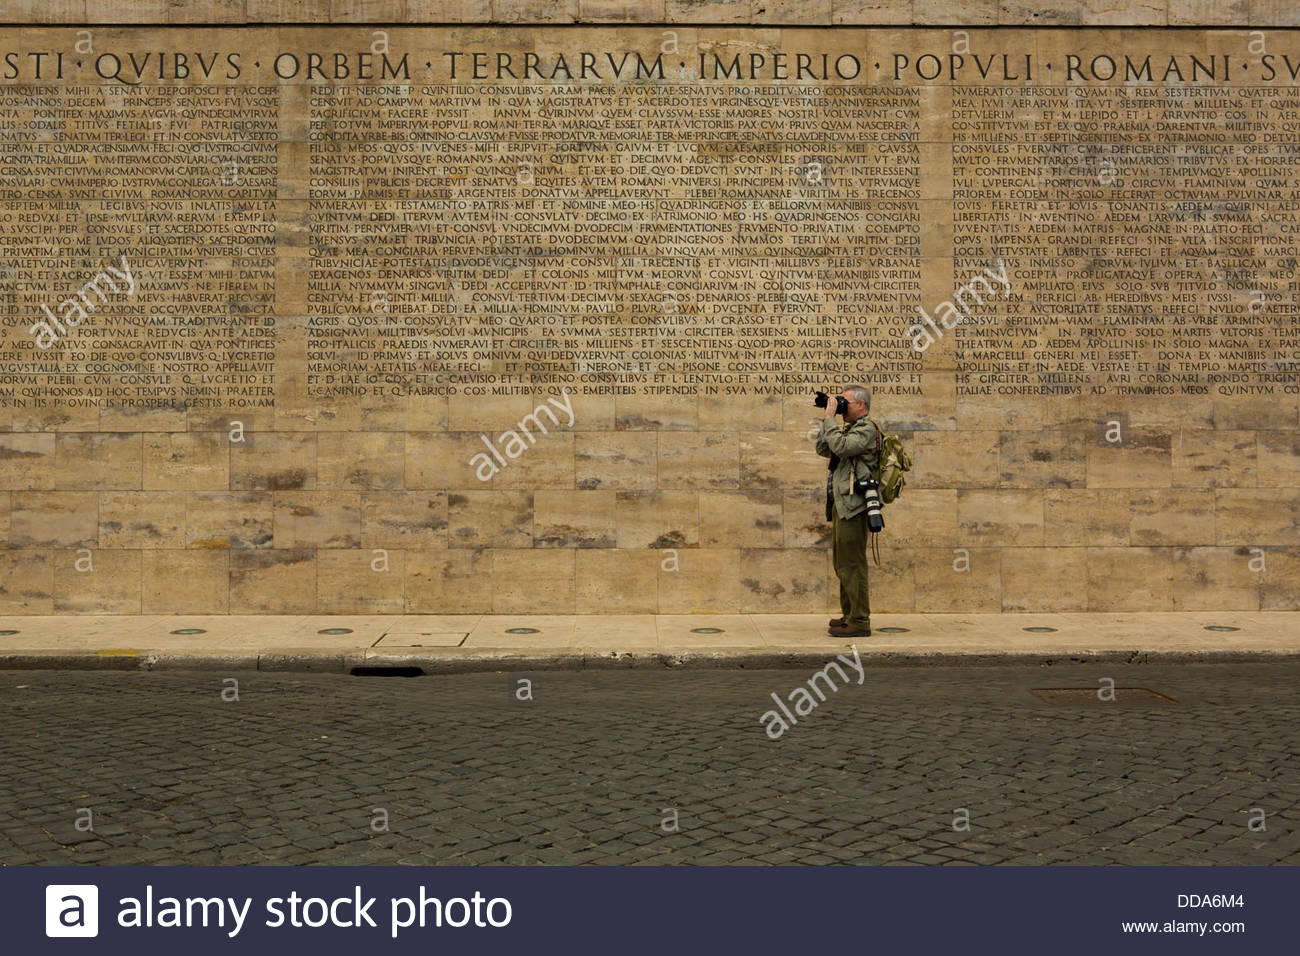 A photographer pauses alongside a engraved wall. Stock Photo